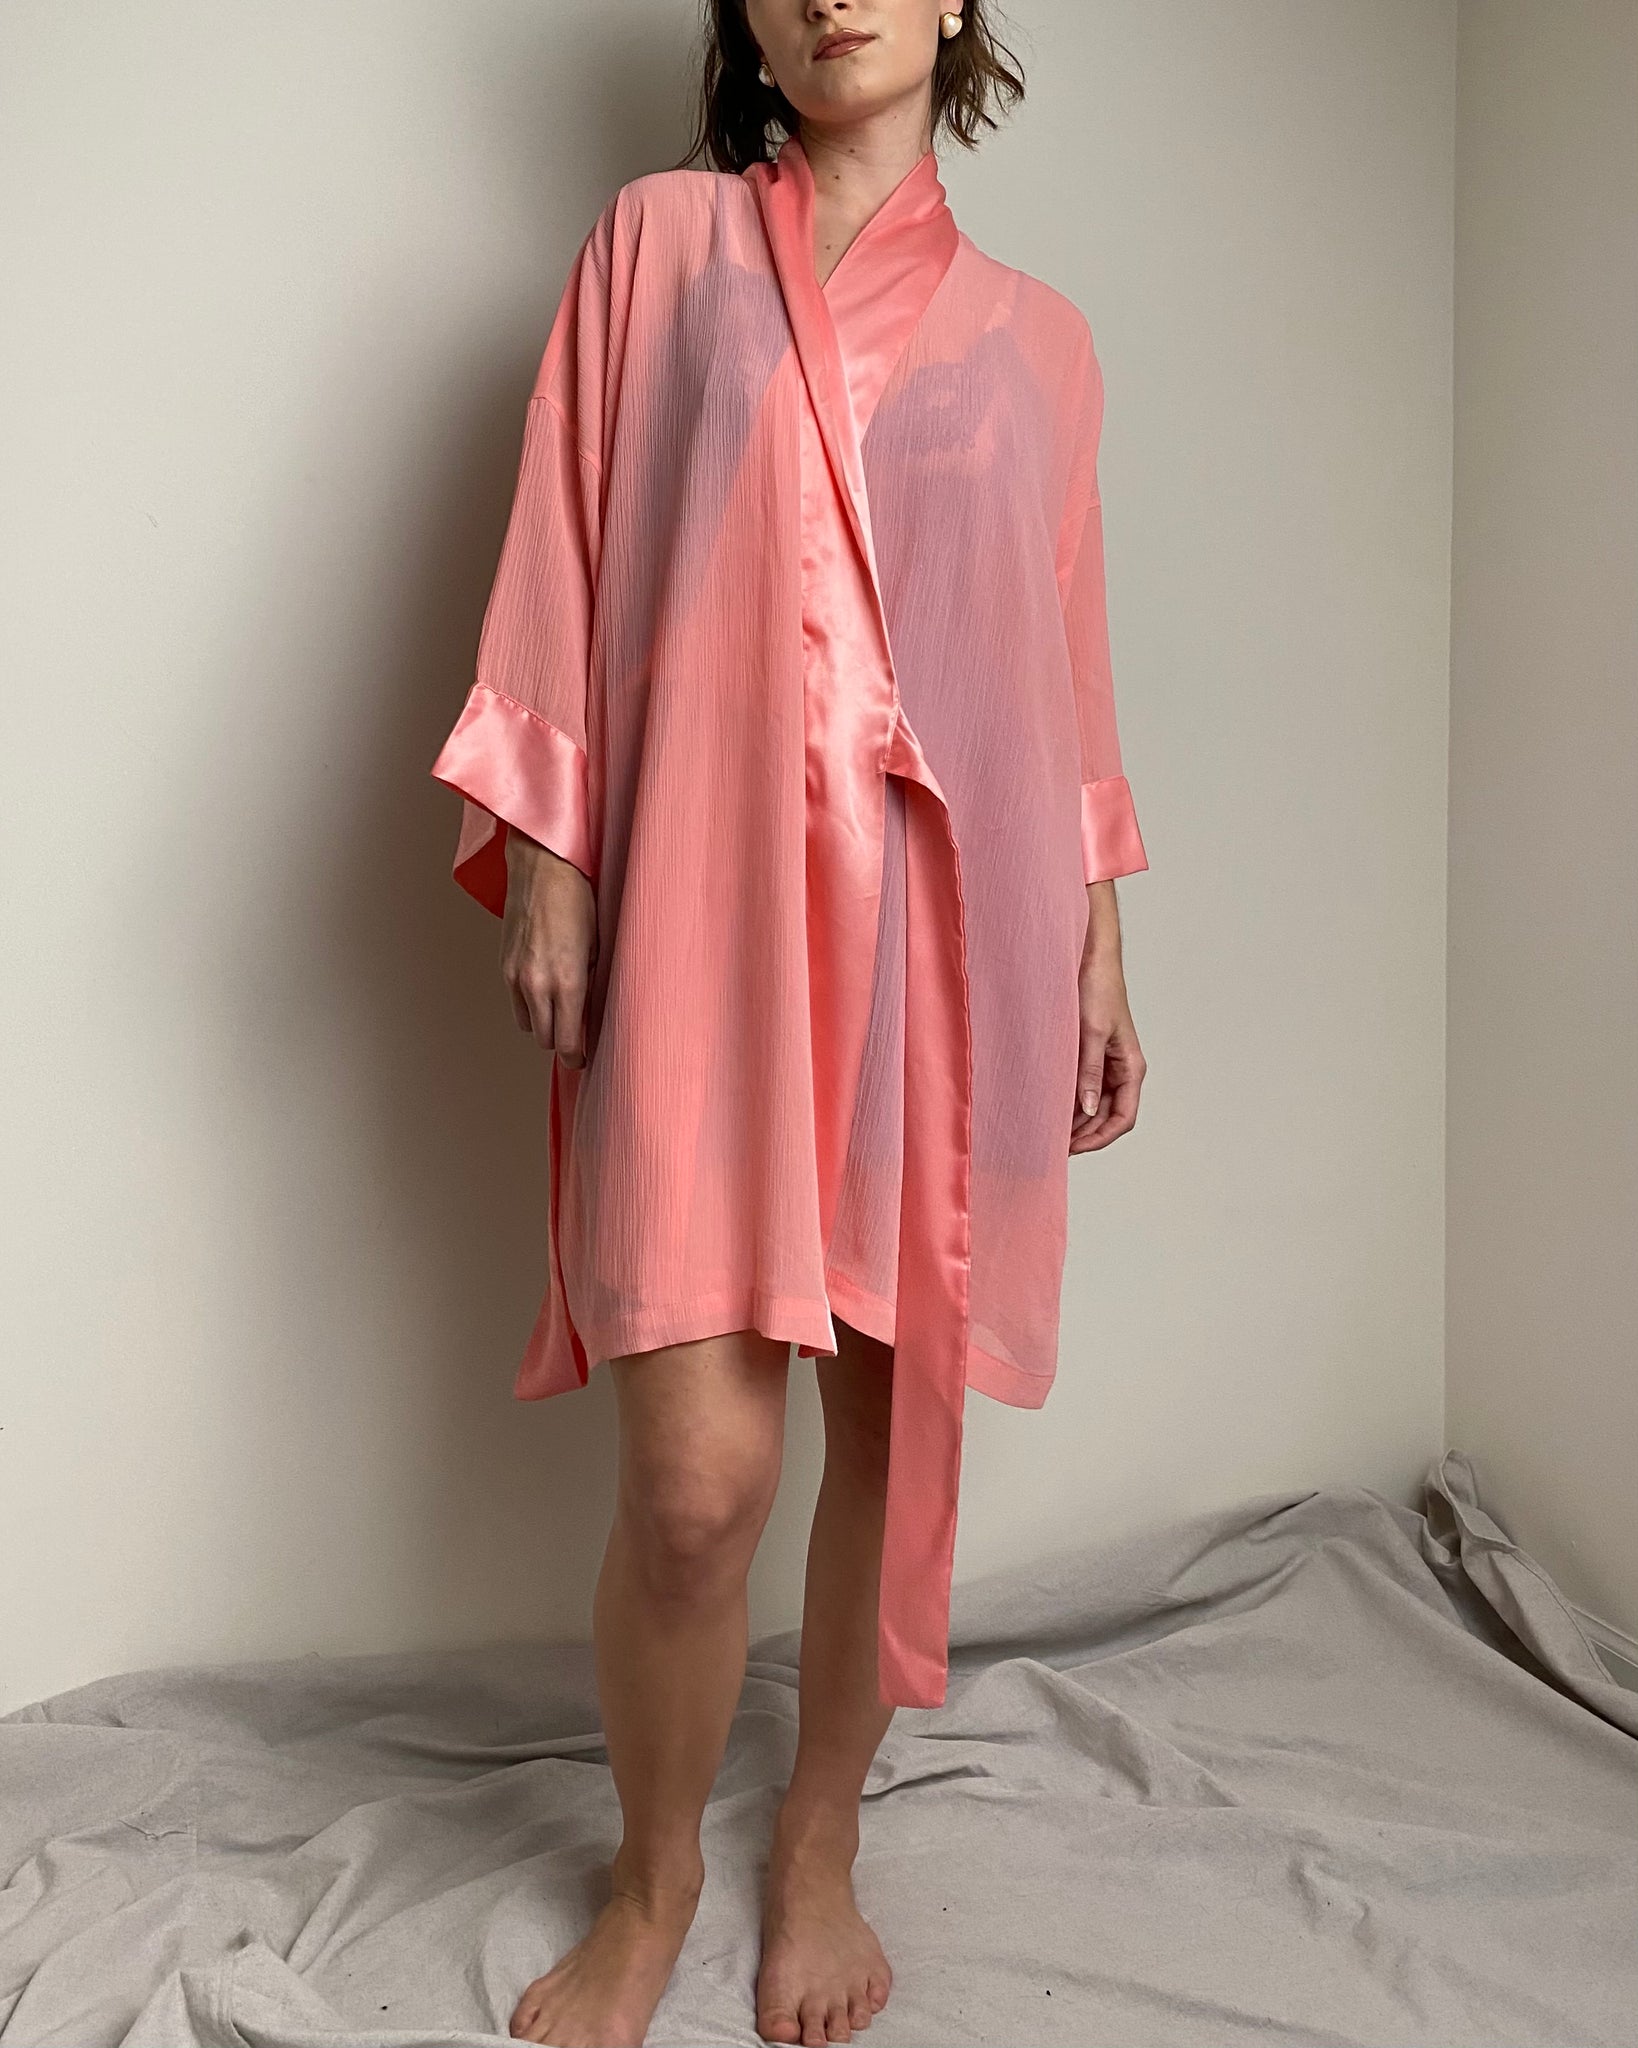 80s Victoria’s Secret Gold Label Sheer Pink Robe (One Size)